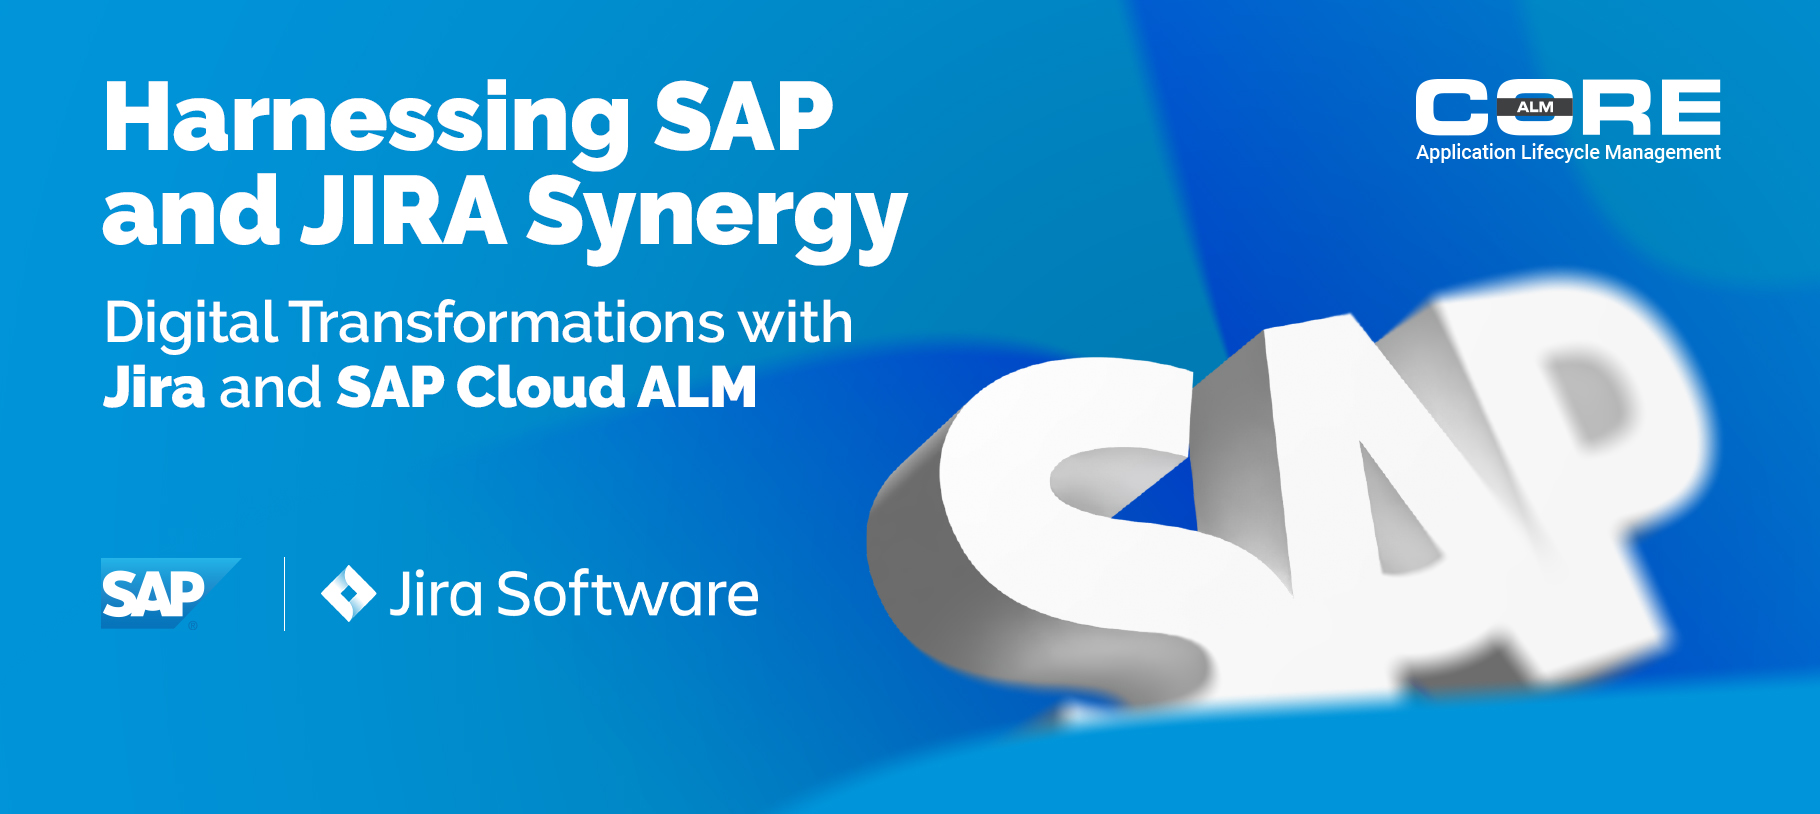 Harnessing SAP And JIRA Synergy: Digital Transformations With Jira And SAP Cloud ALM